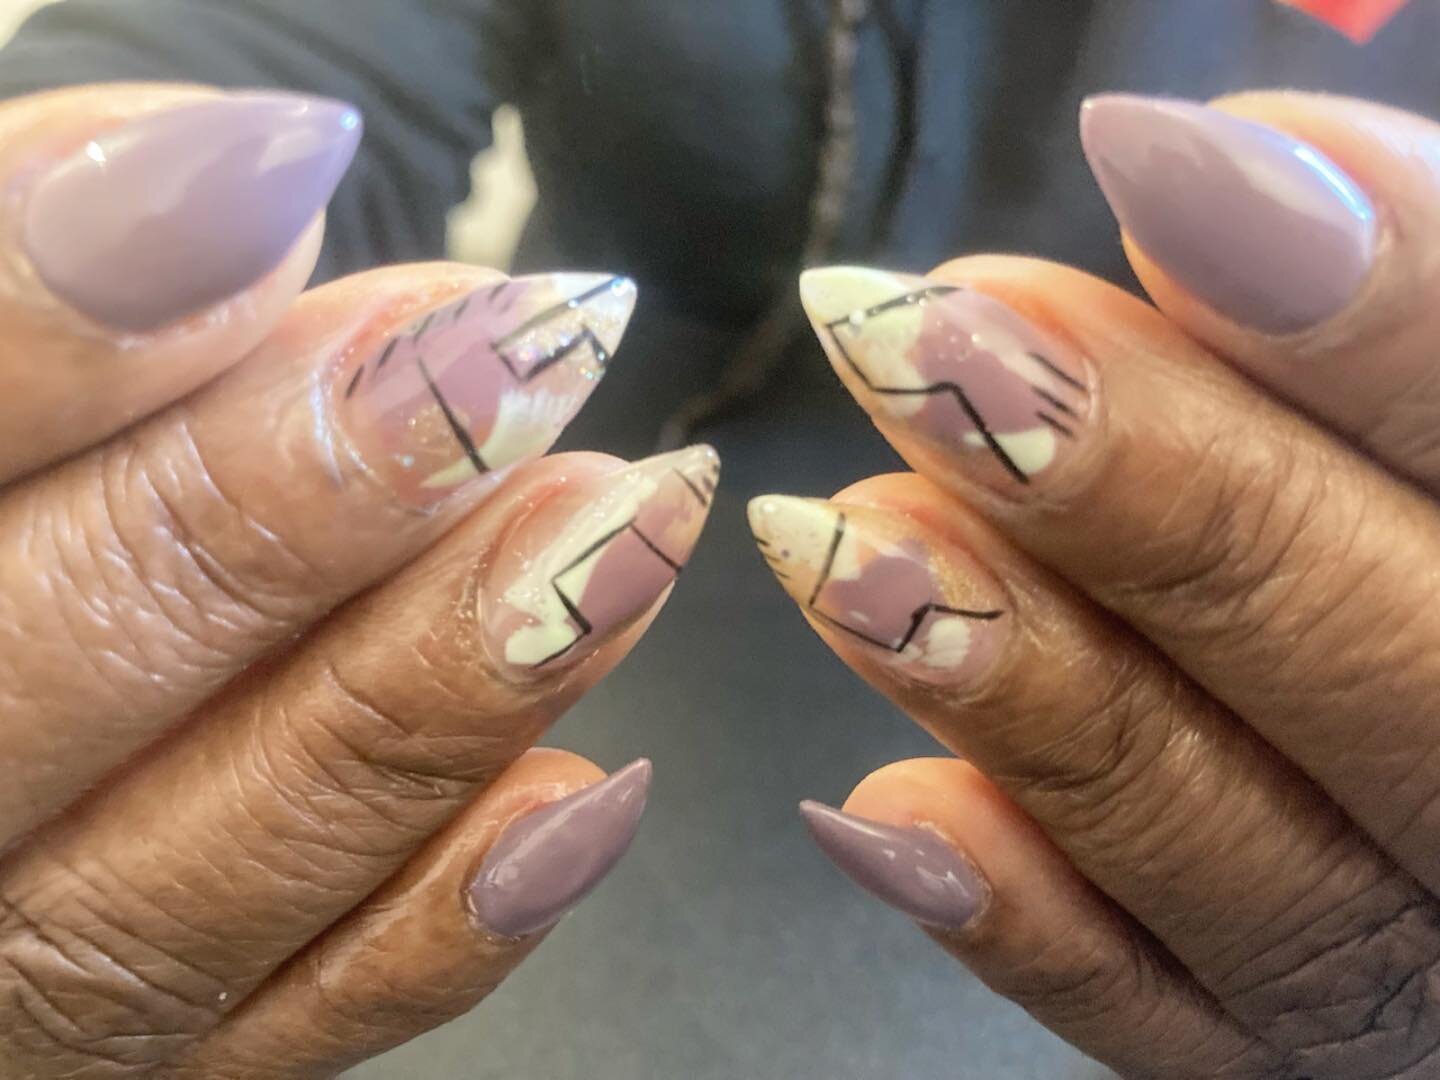 Baby Stiletto, Polygel, Mauve and Art. 

Don&rsquo;t forget to book ahead. Info in bio

#polygelnails #polygel #nails #nailart #shortnails #stilettonails #blacknailtech #nycnailtech #nailstylist #nailartist #naildesign